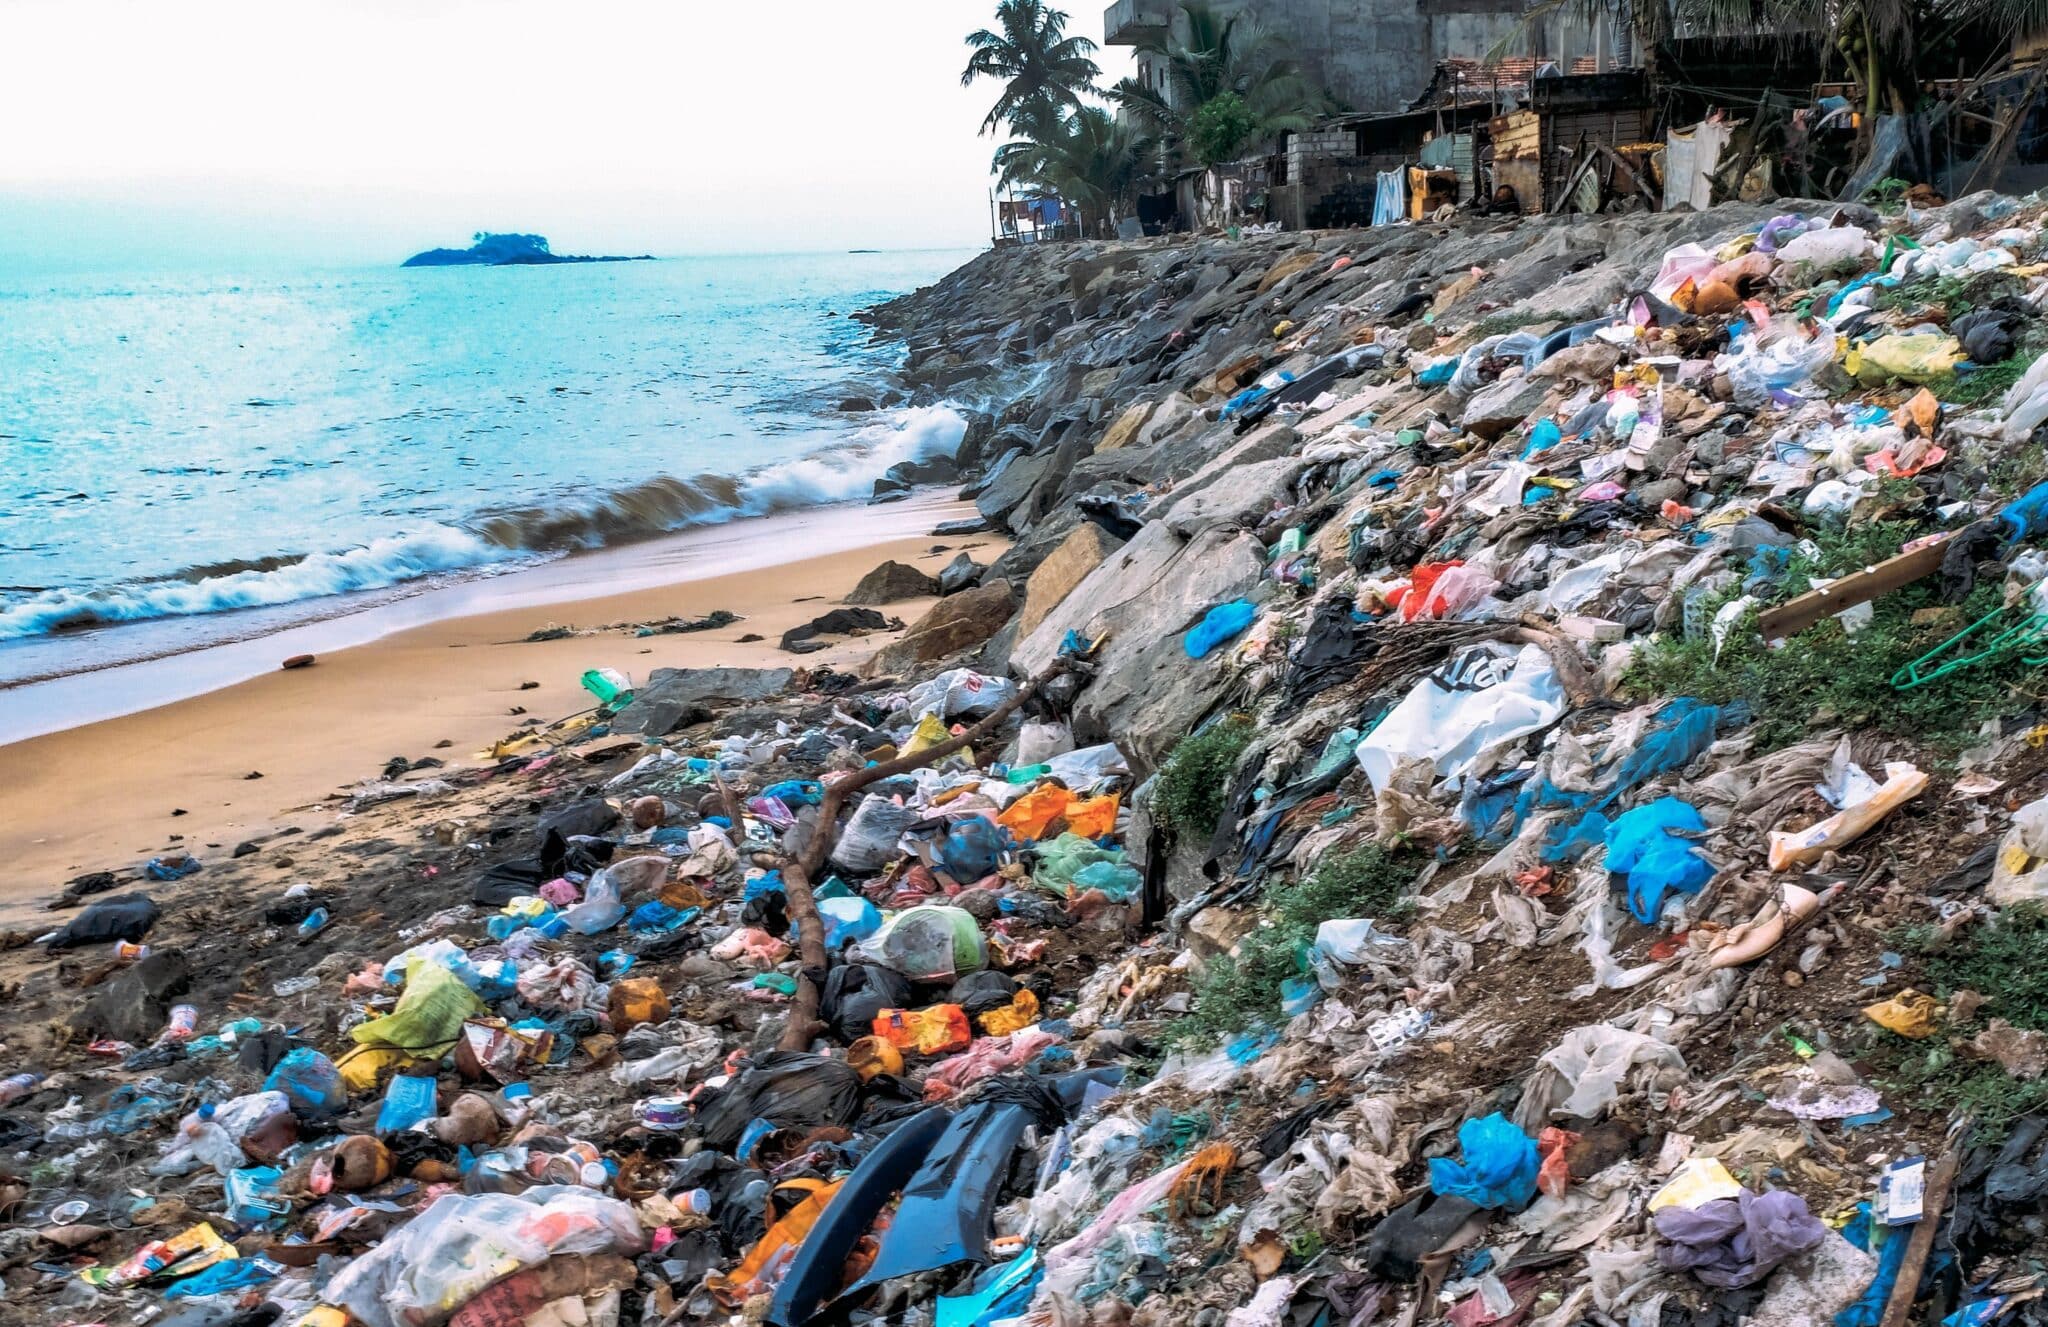 A shoreline polluted with plastic waste.